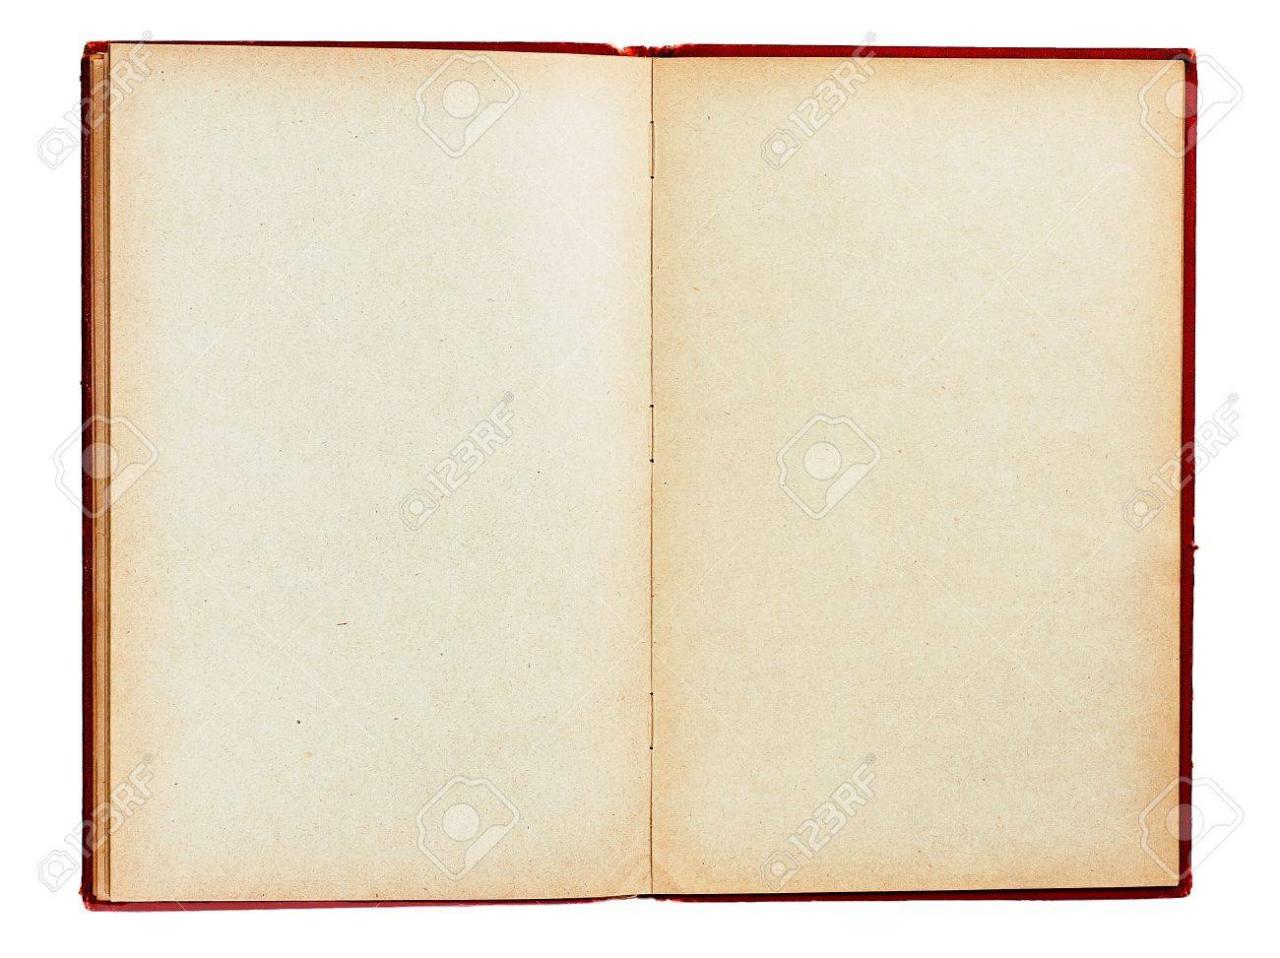 Old Book With Empty Pages Isolated Stock Photo, Picture And Royalty Free  Image. Image 12194518.